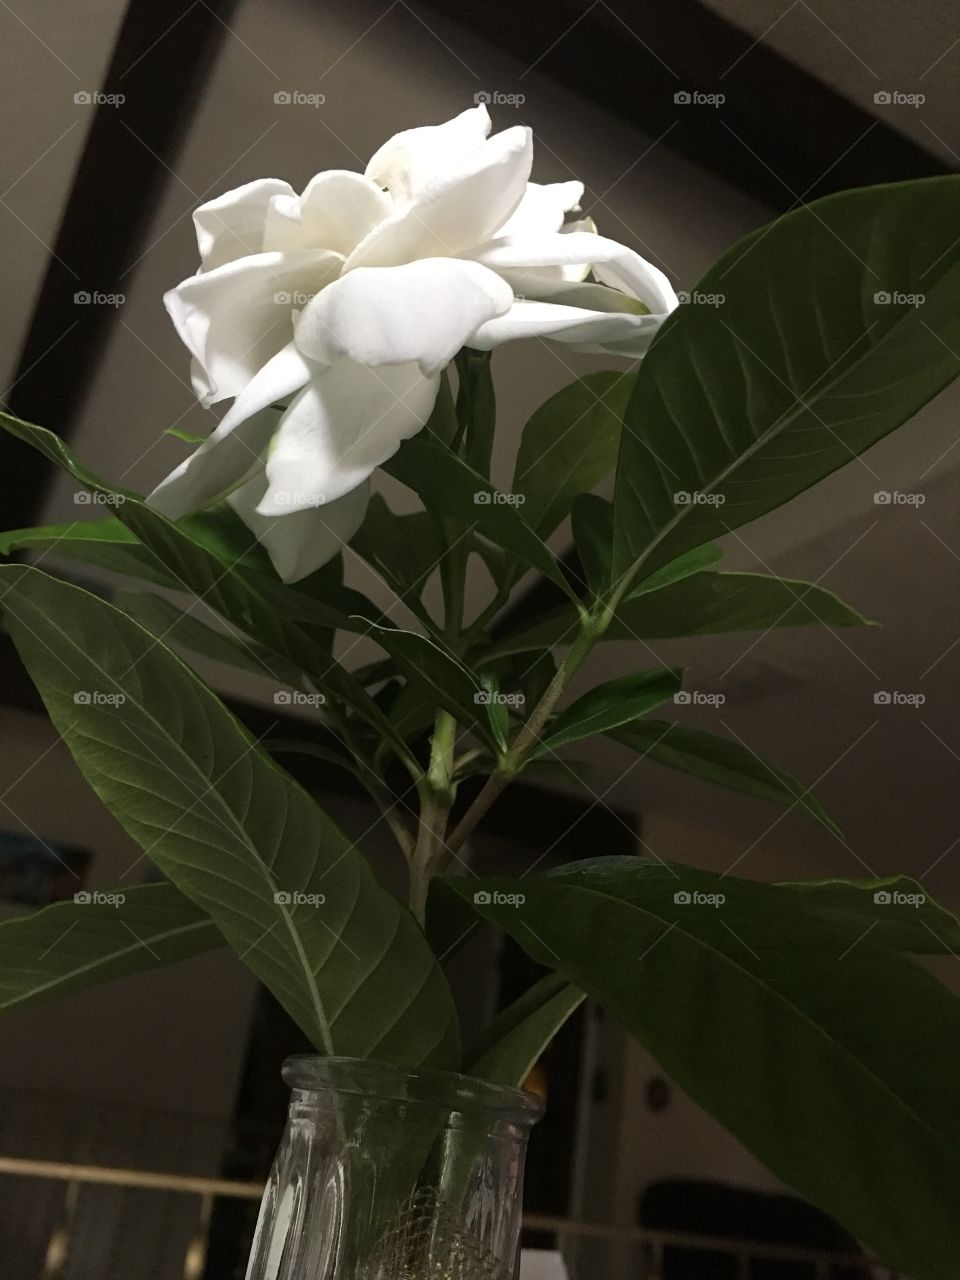 Green leaves on Gardenia flower with beams background 